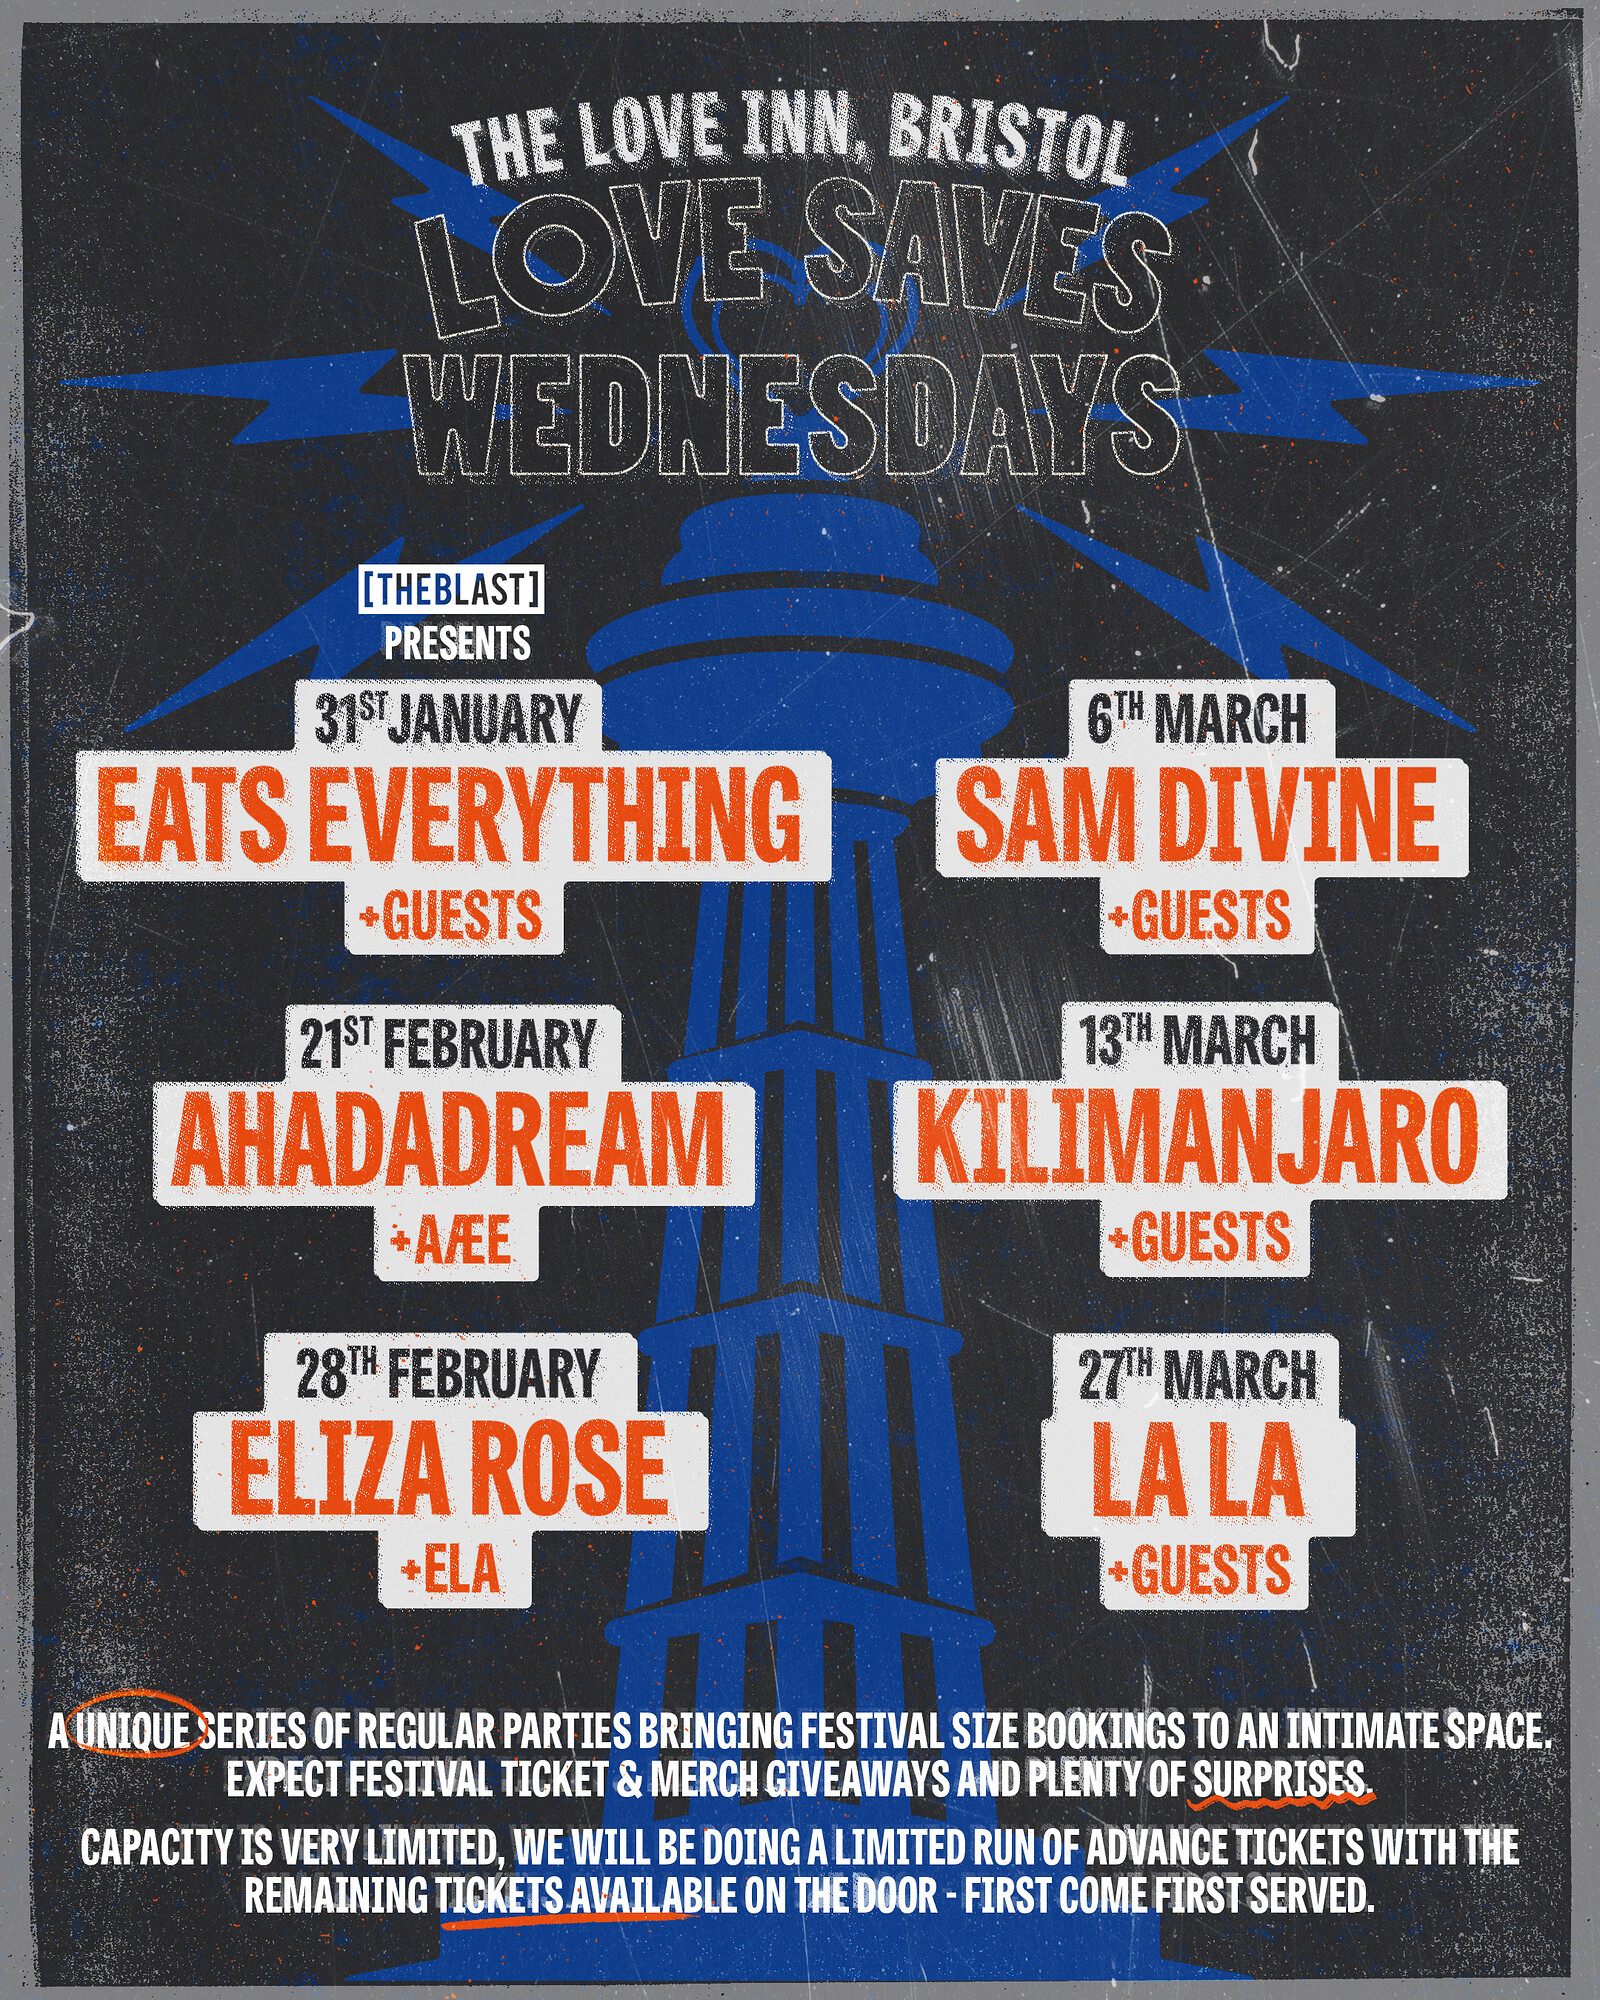 Love Saves Wednesdays w/ Sam Divine + Guests at The Love Inn